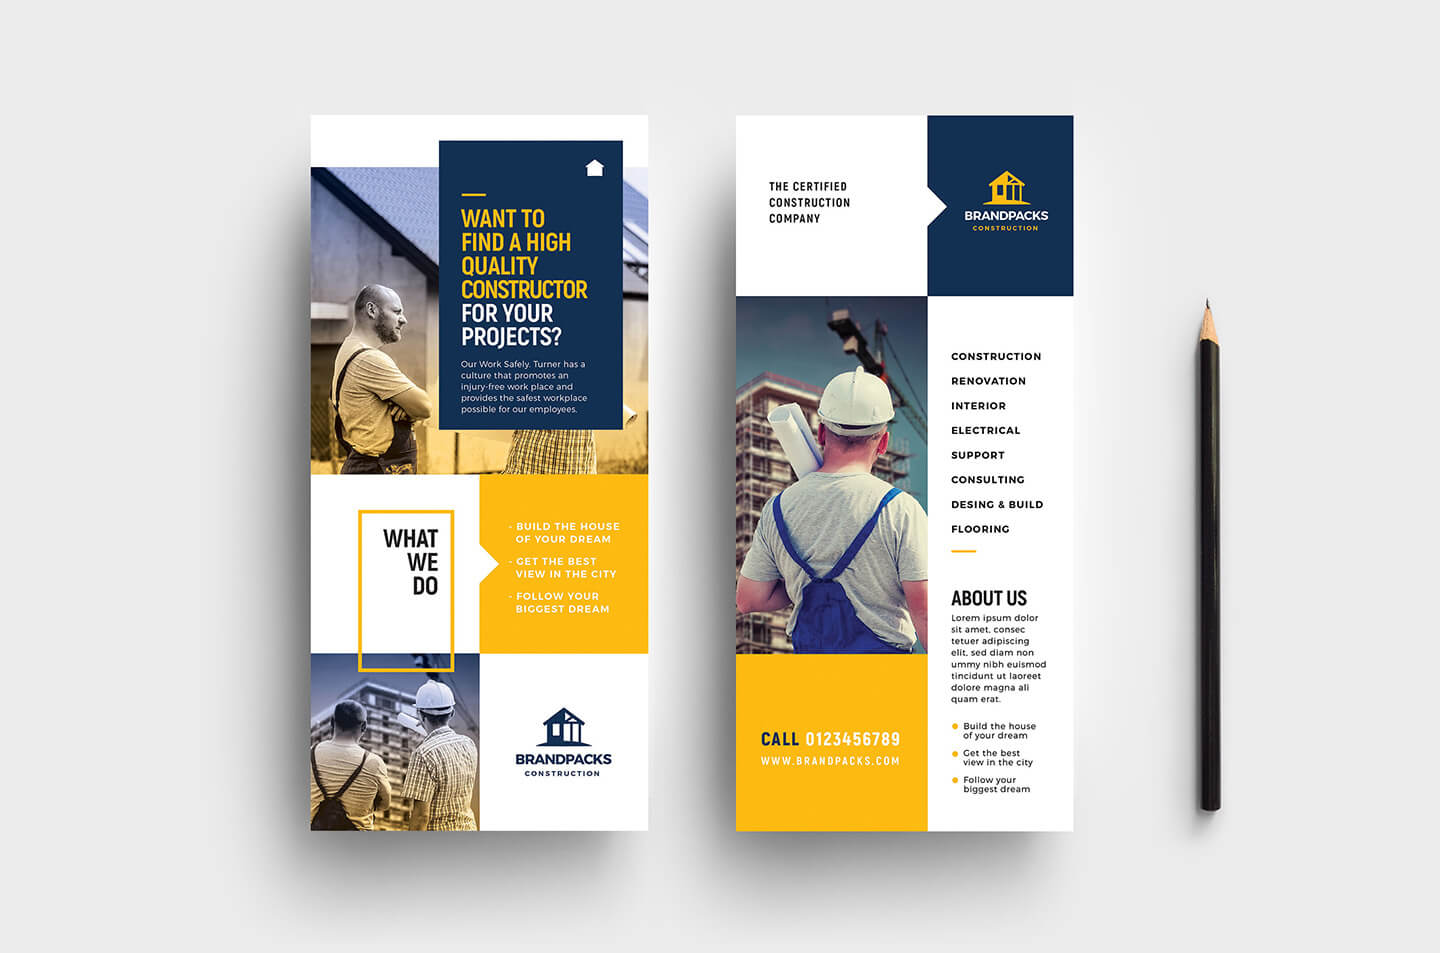 023 Construction Business Card Template Psd Ideas Company Dl Throughout Dl Card Template